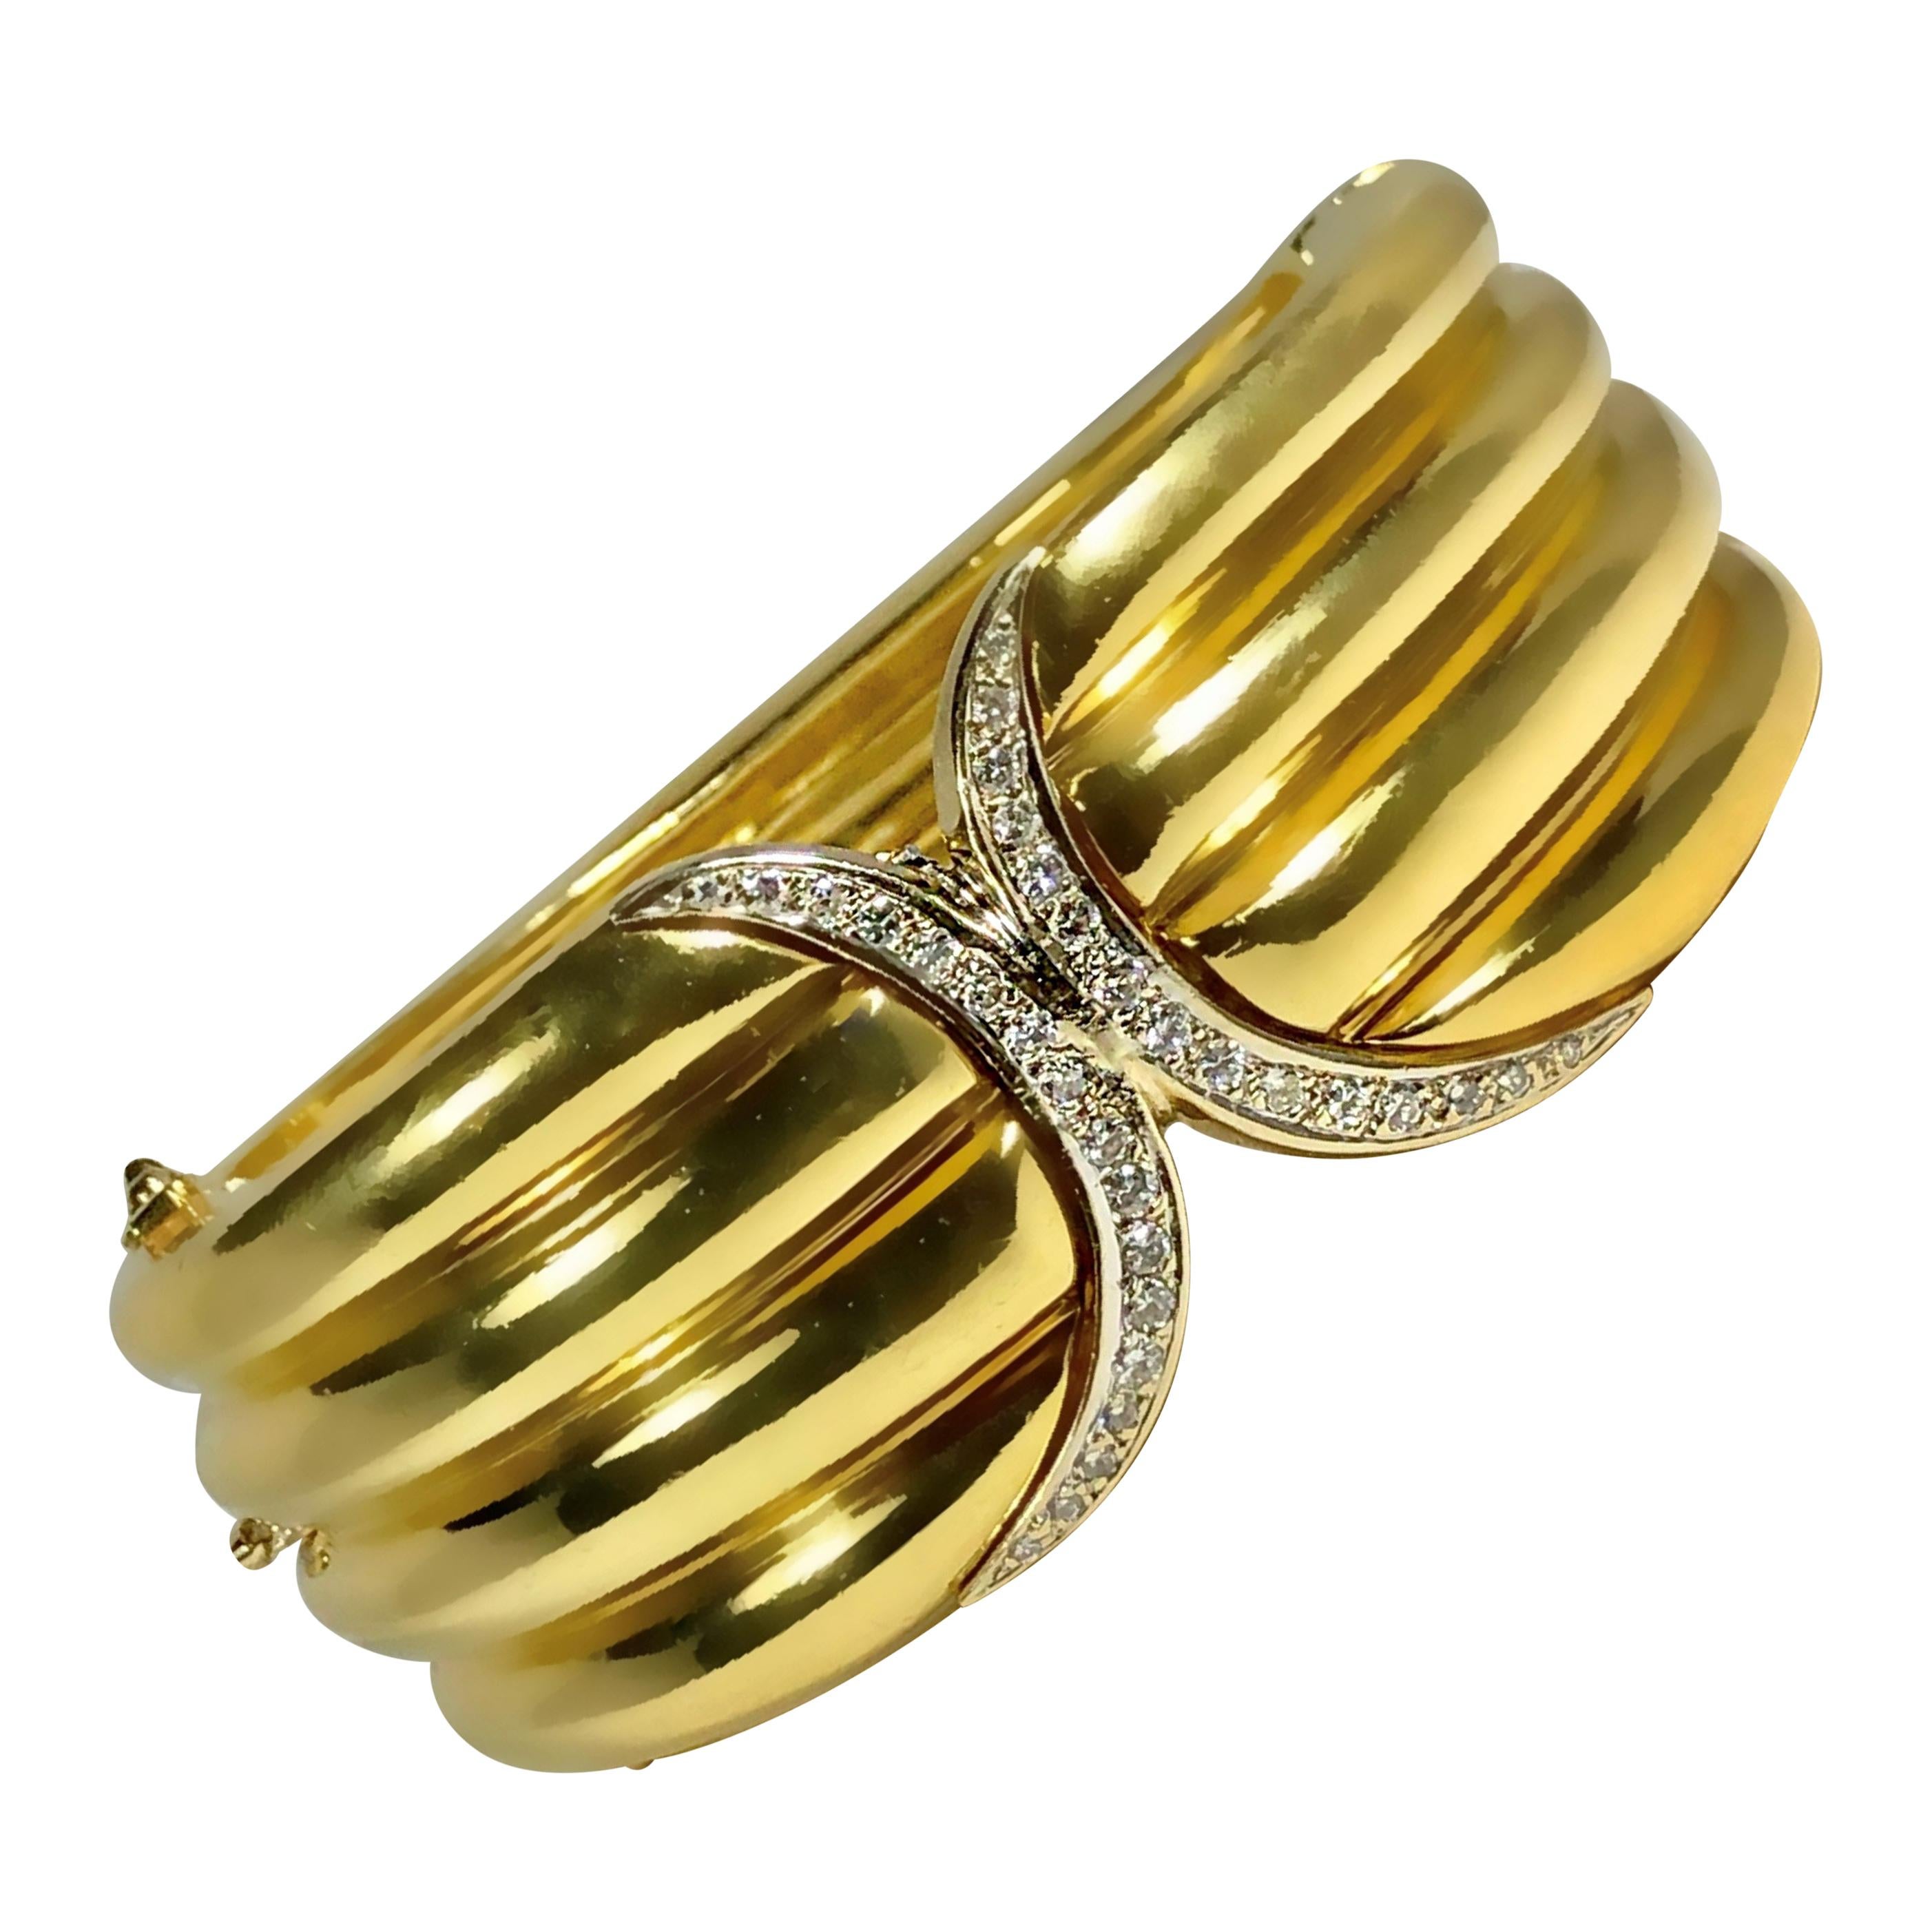 Fluted Gold and Diamond Cuff Bracelet